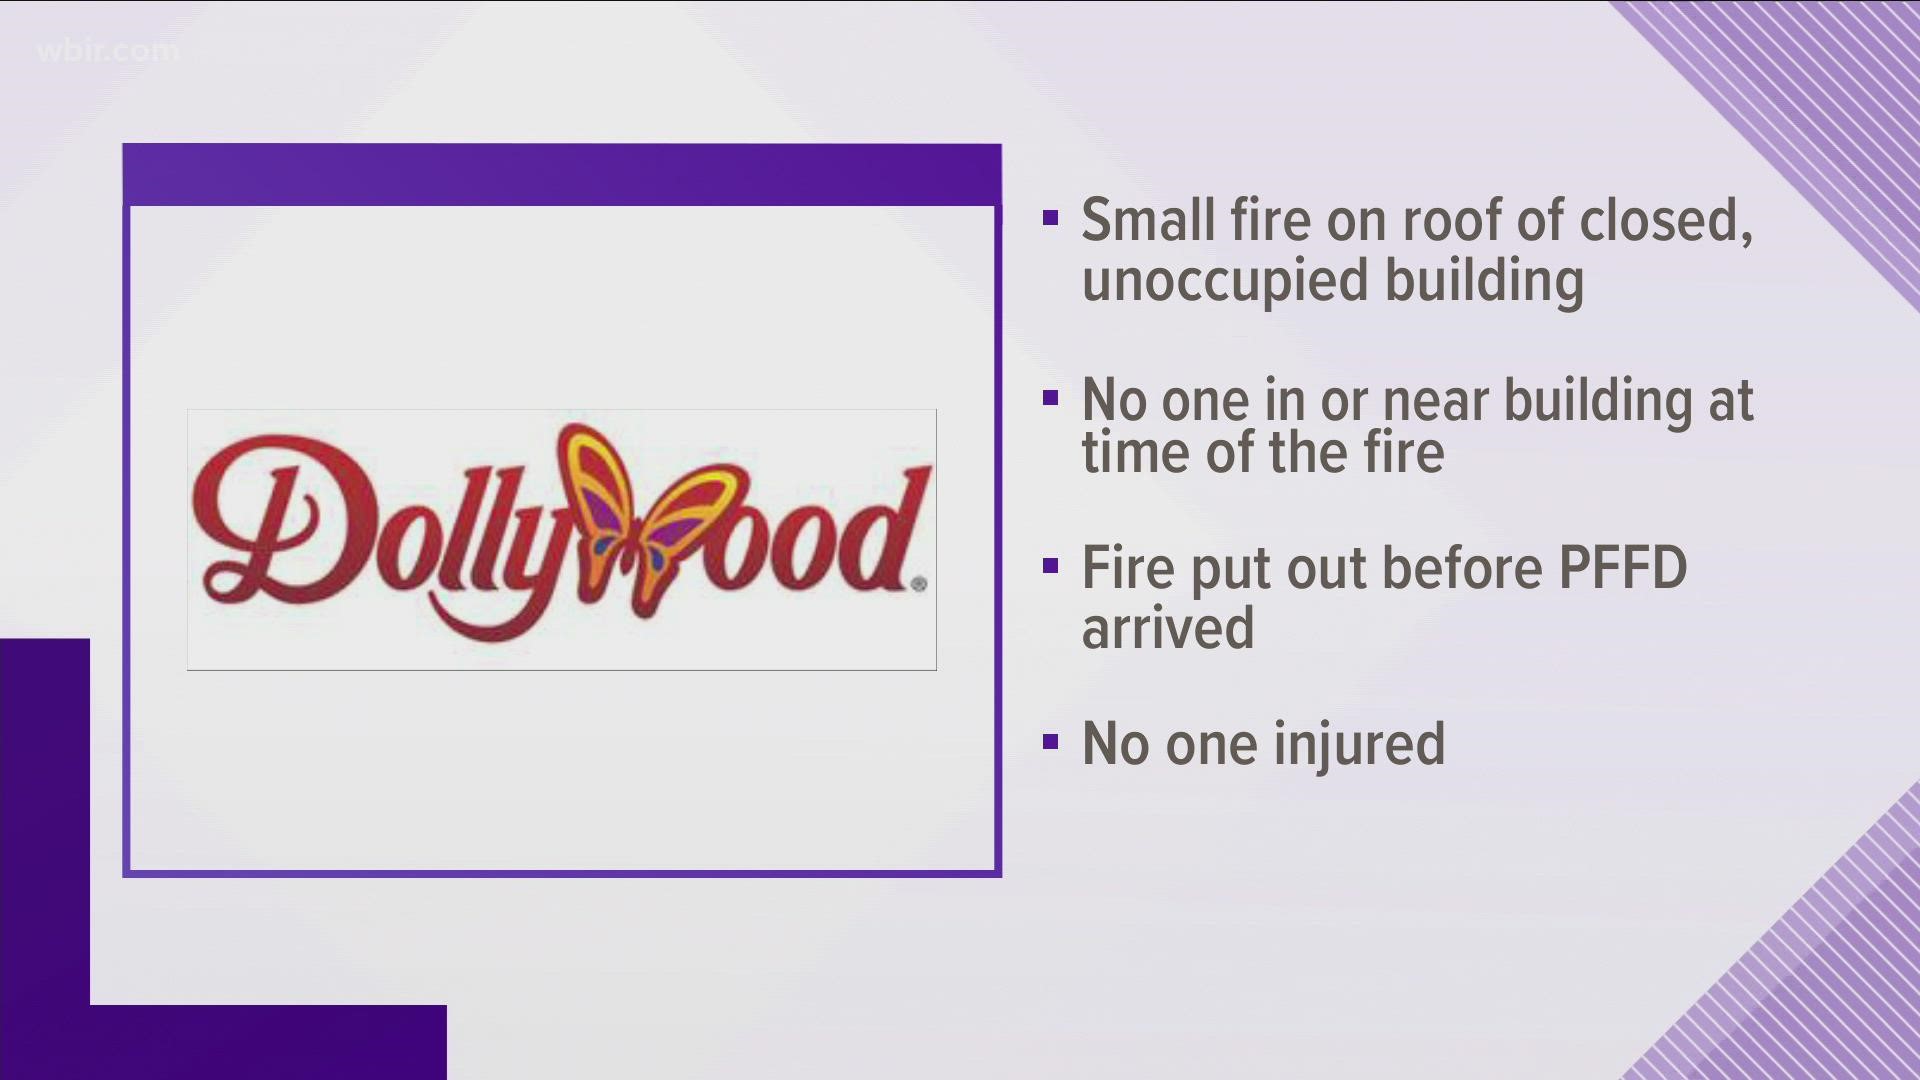 A Dollywood spokesperson says that the fire originated in a heating and air conditioning unit on top of an unoccupied building.